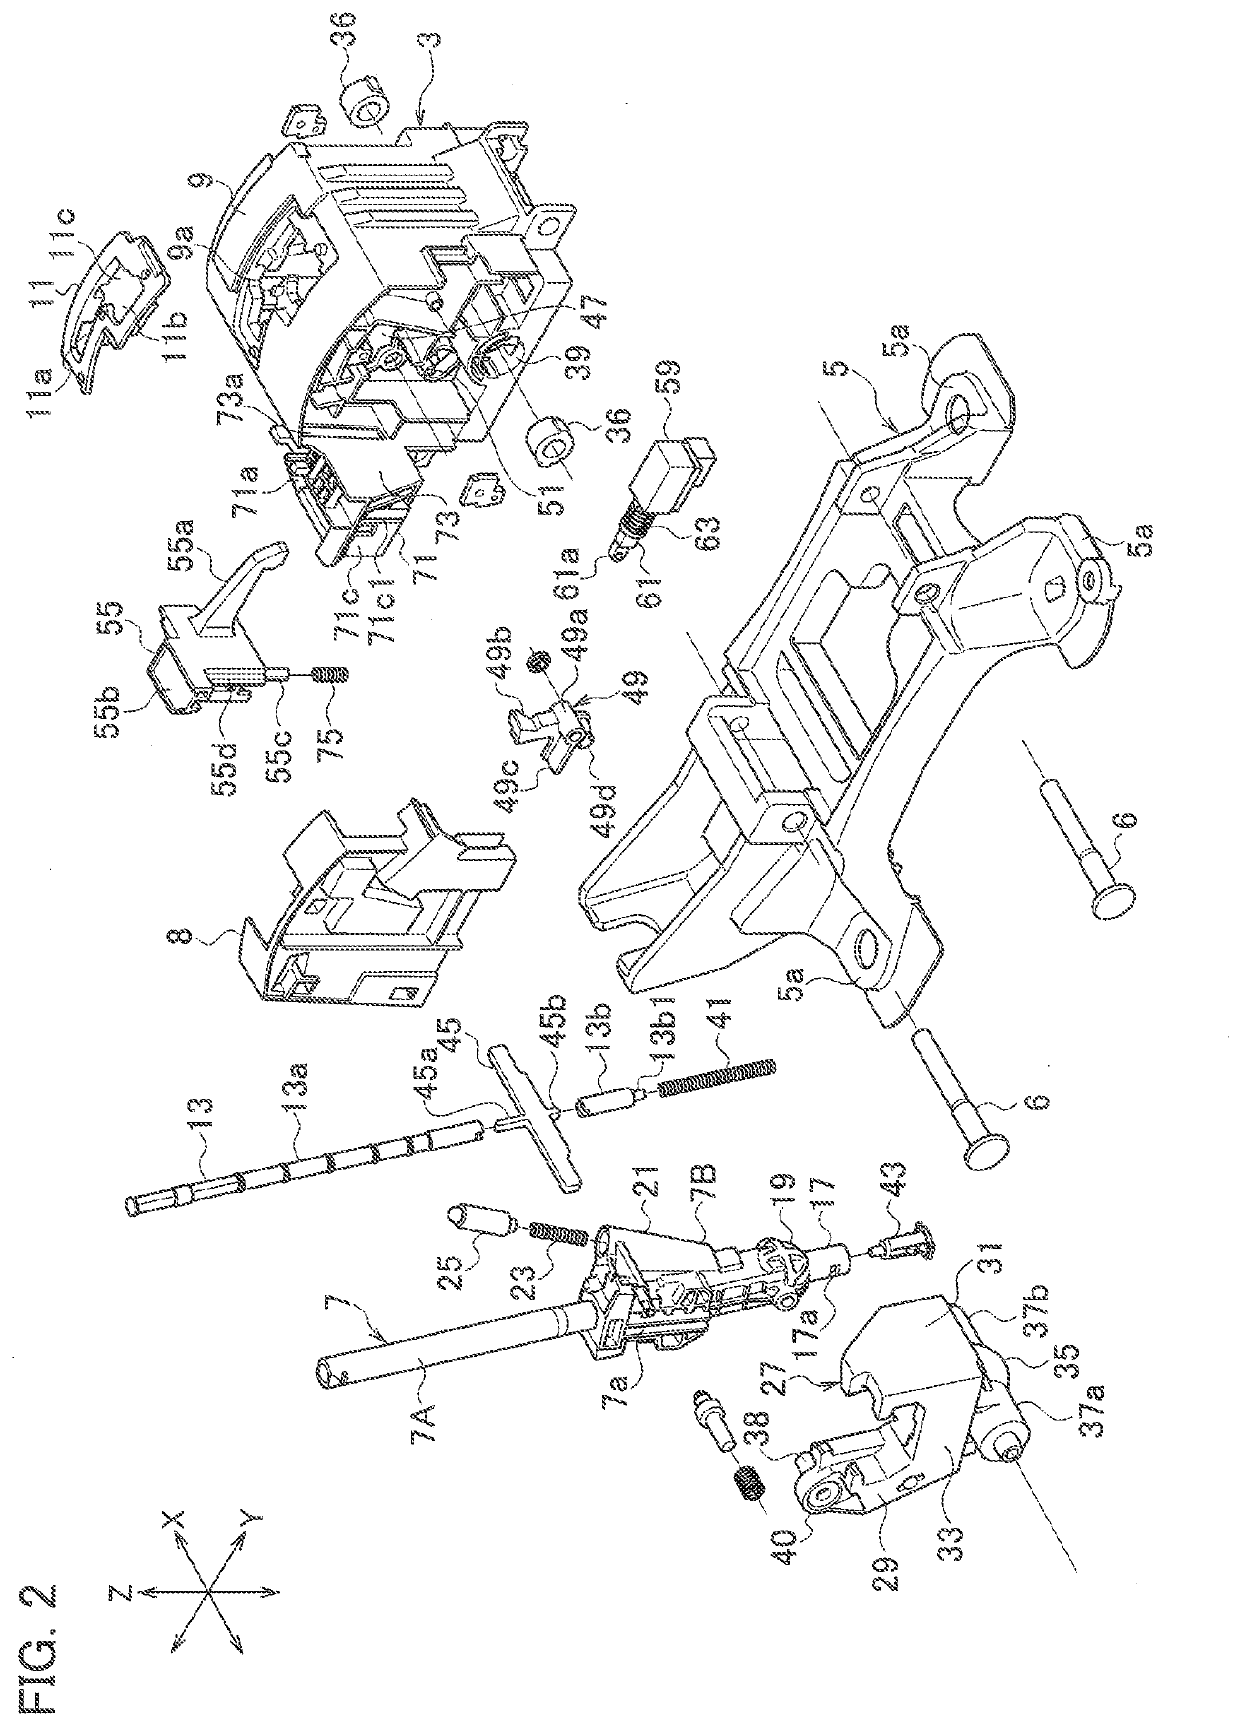 Gearshift lever device